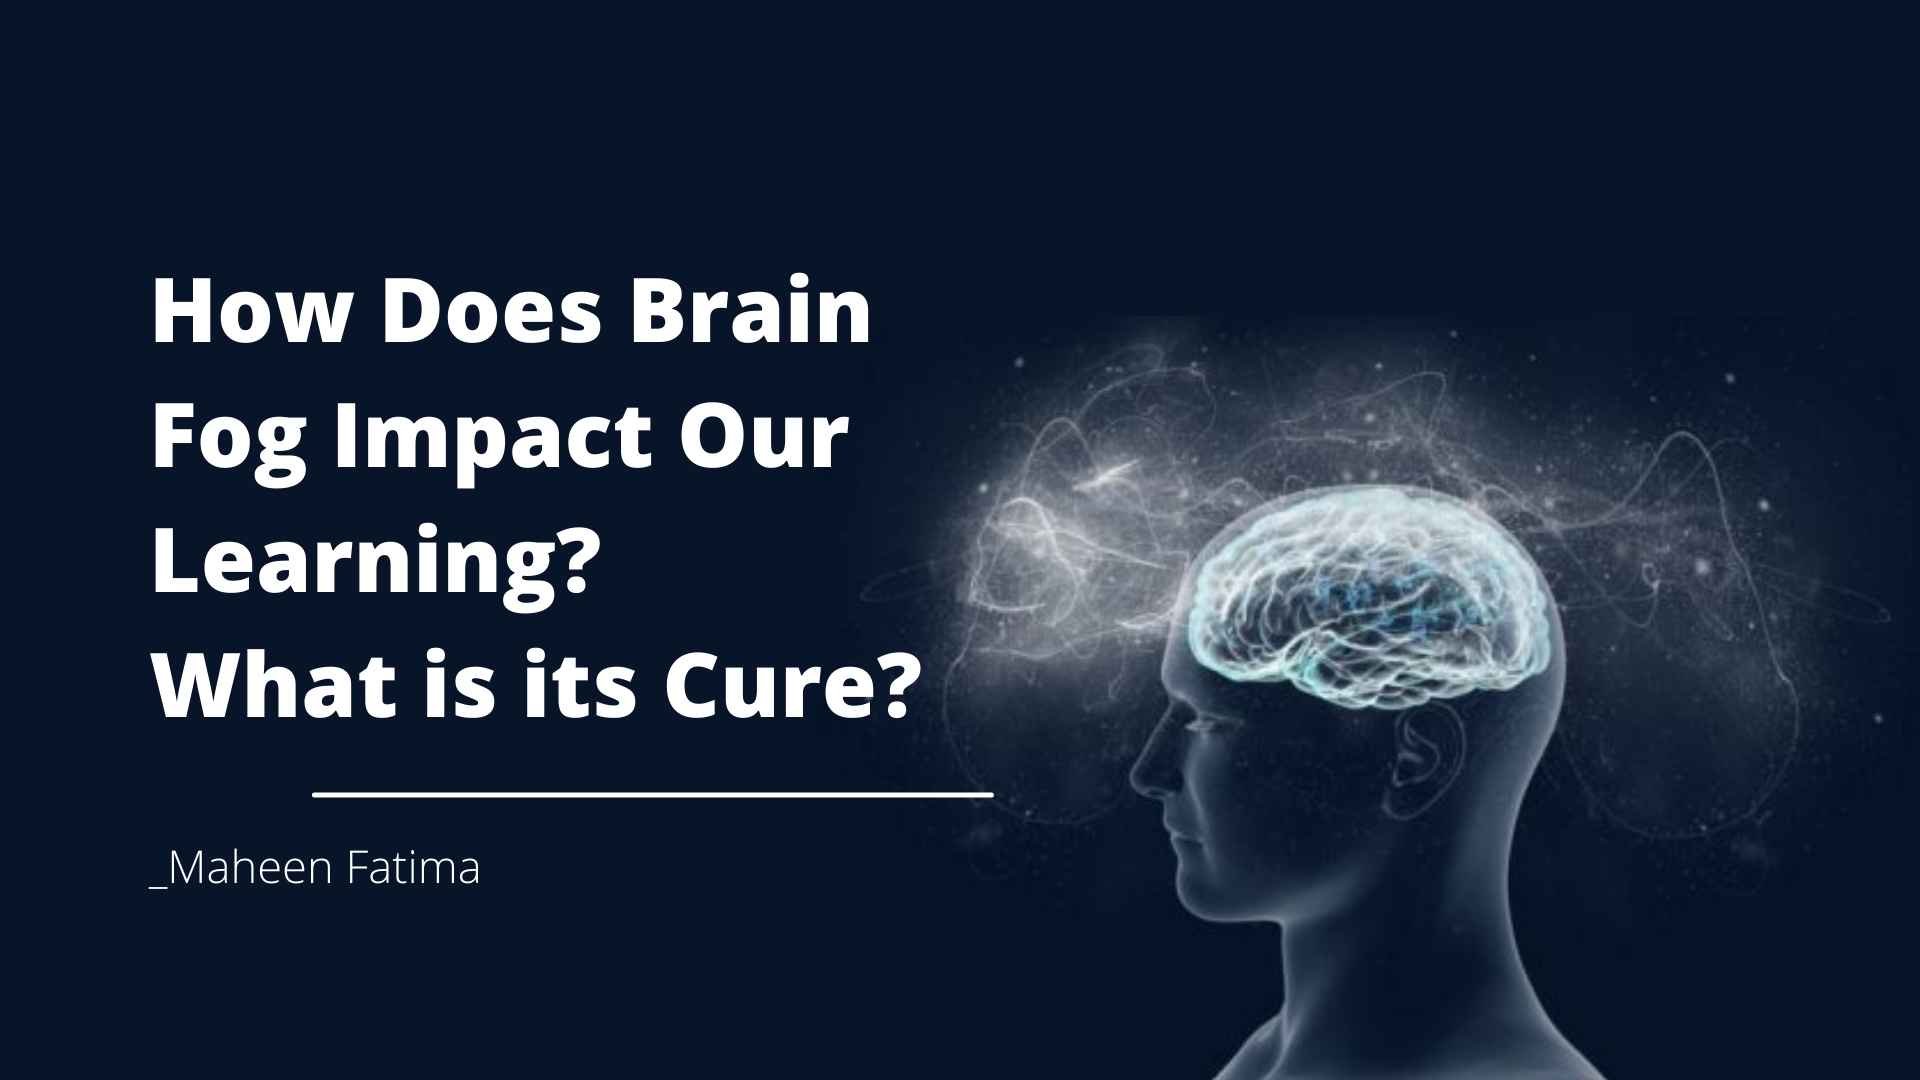 How does brain fog impact our learning? What is its cure